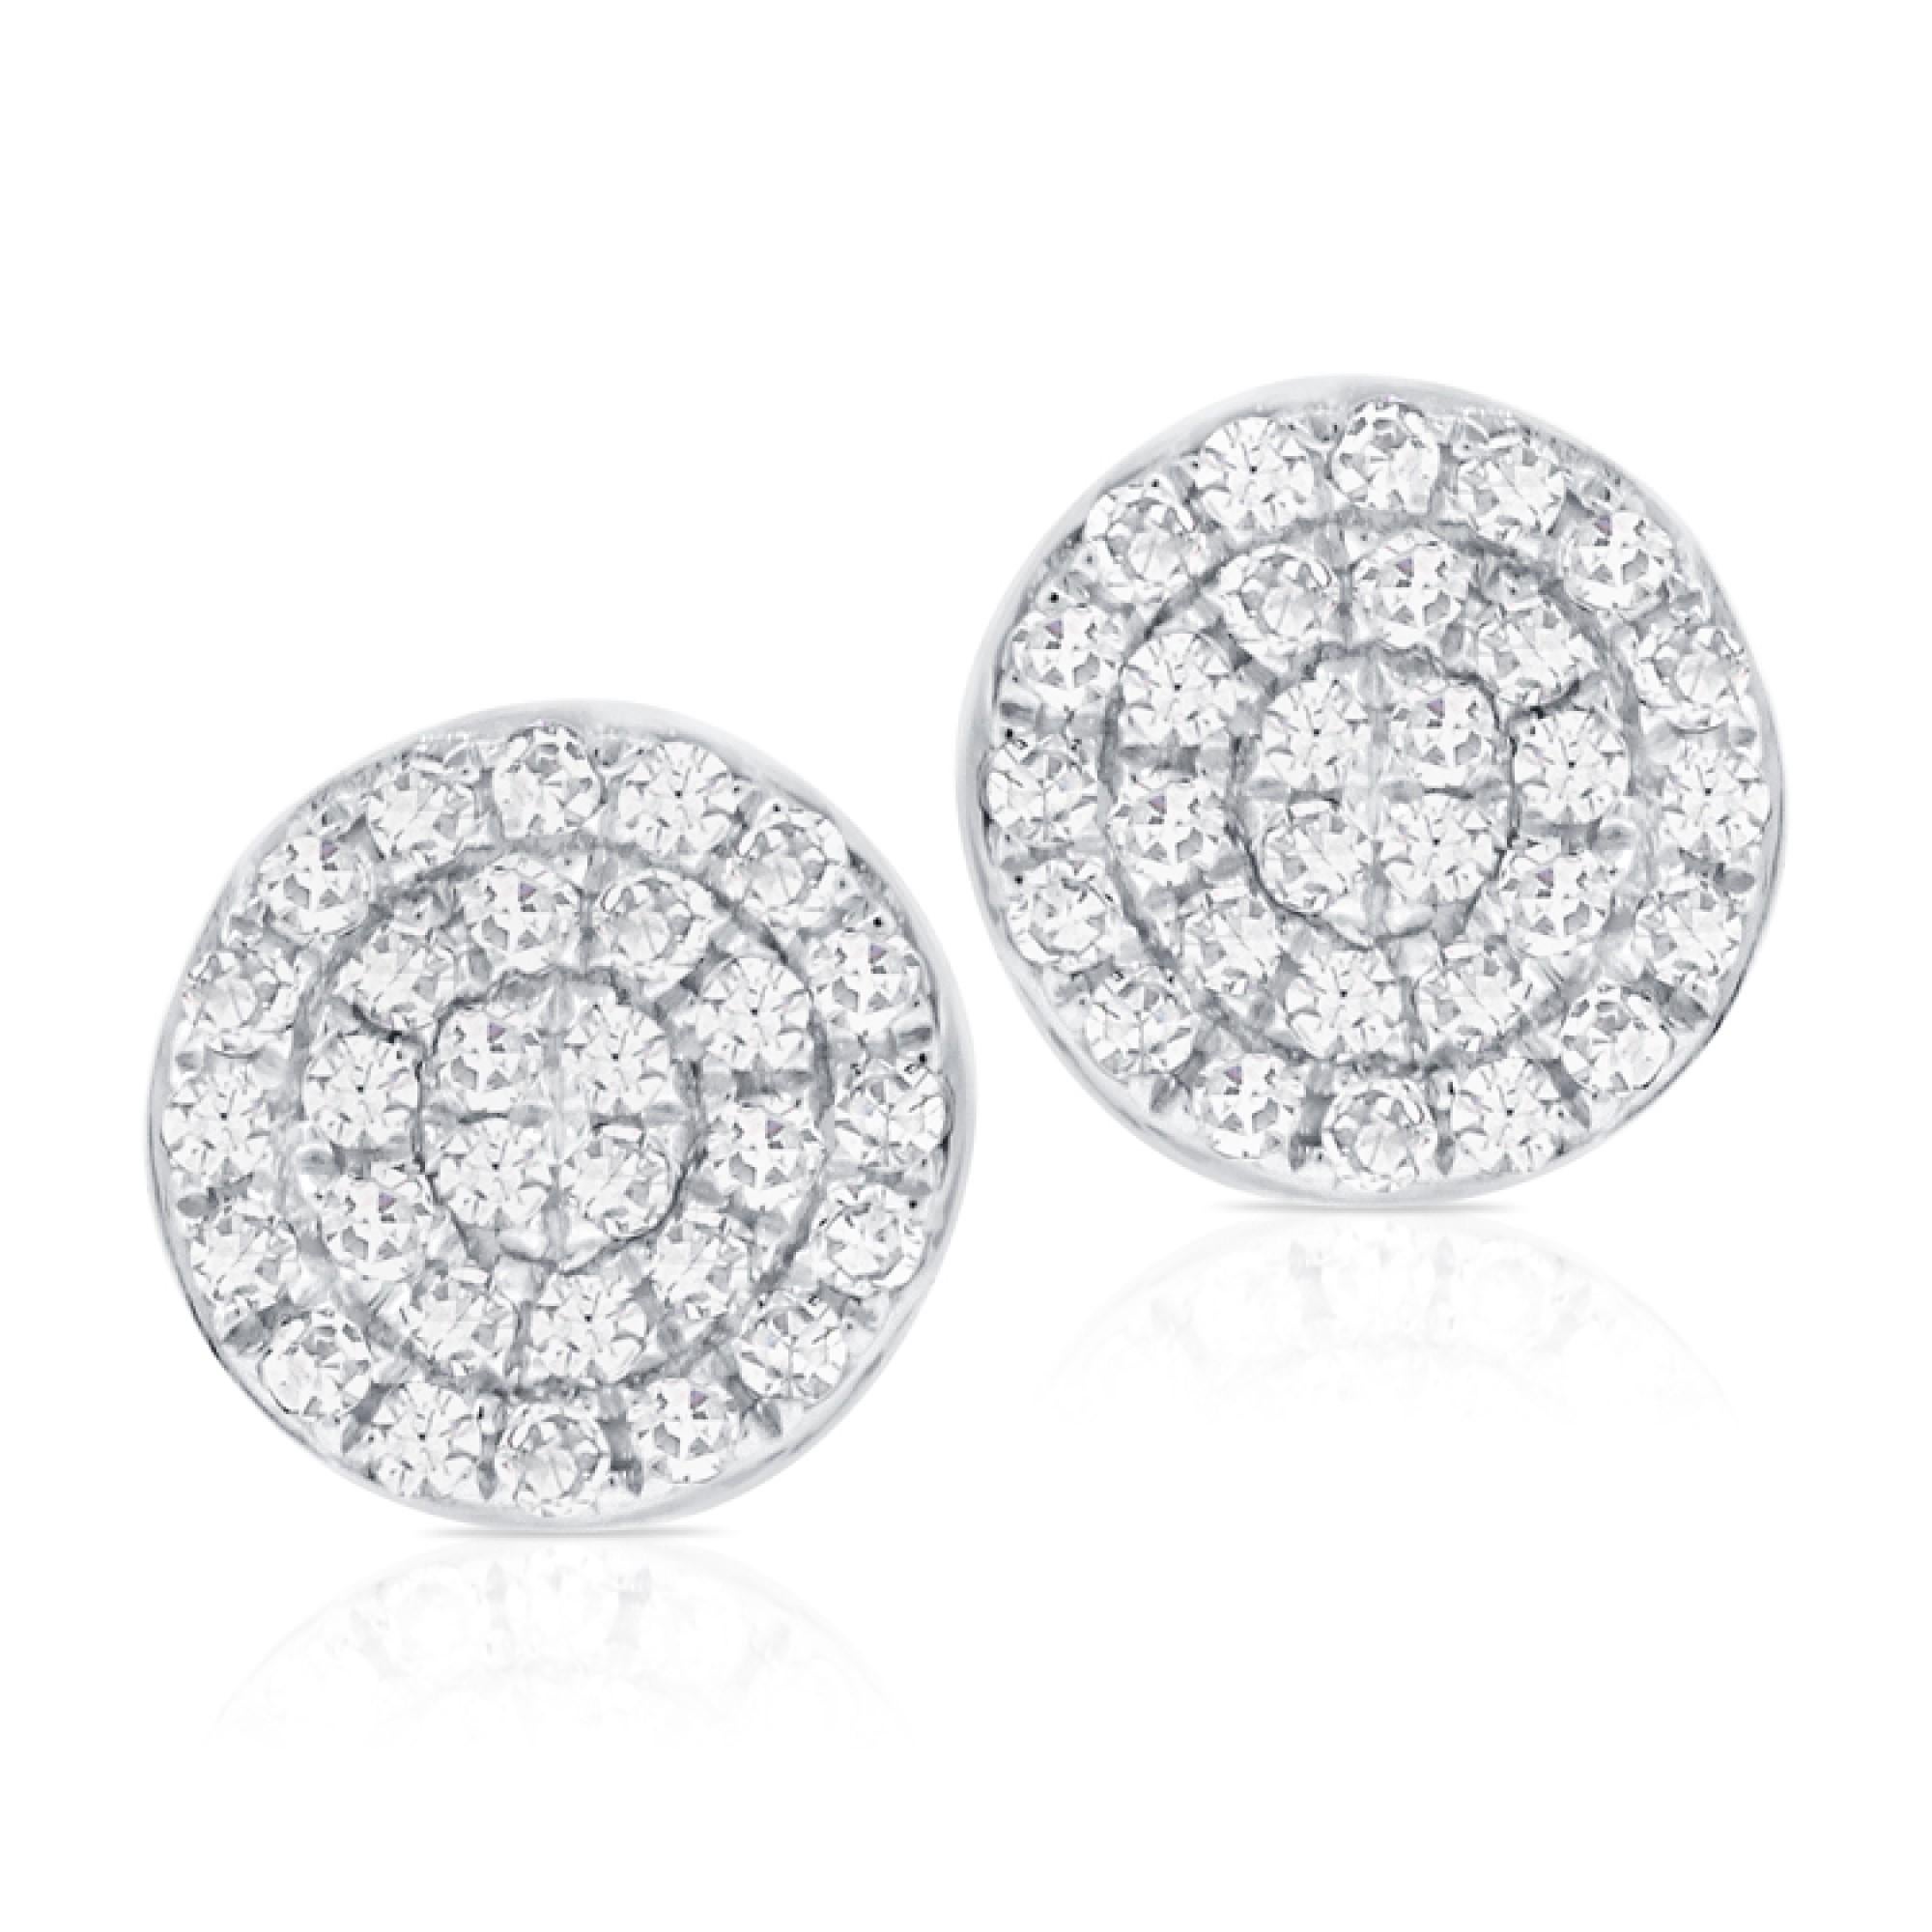 Adorn yourself with these classic and elegant disc Earrings, Crafted of 14k gold and featuring approximately 0.18 ct. of sparkling white diamonds. Available in white, yellow and rose gold.  Diamond color and Clarity GH SI1-SI2 
-14K Gold
-Diamond